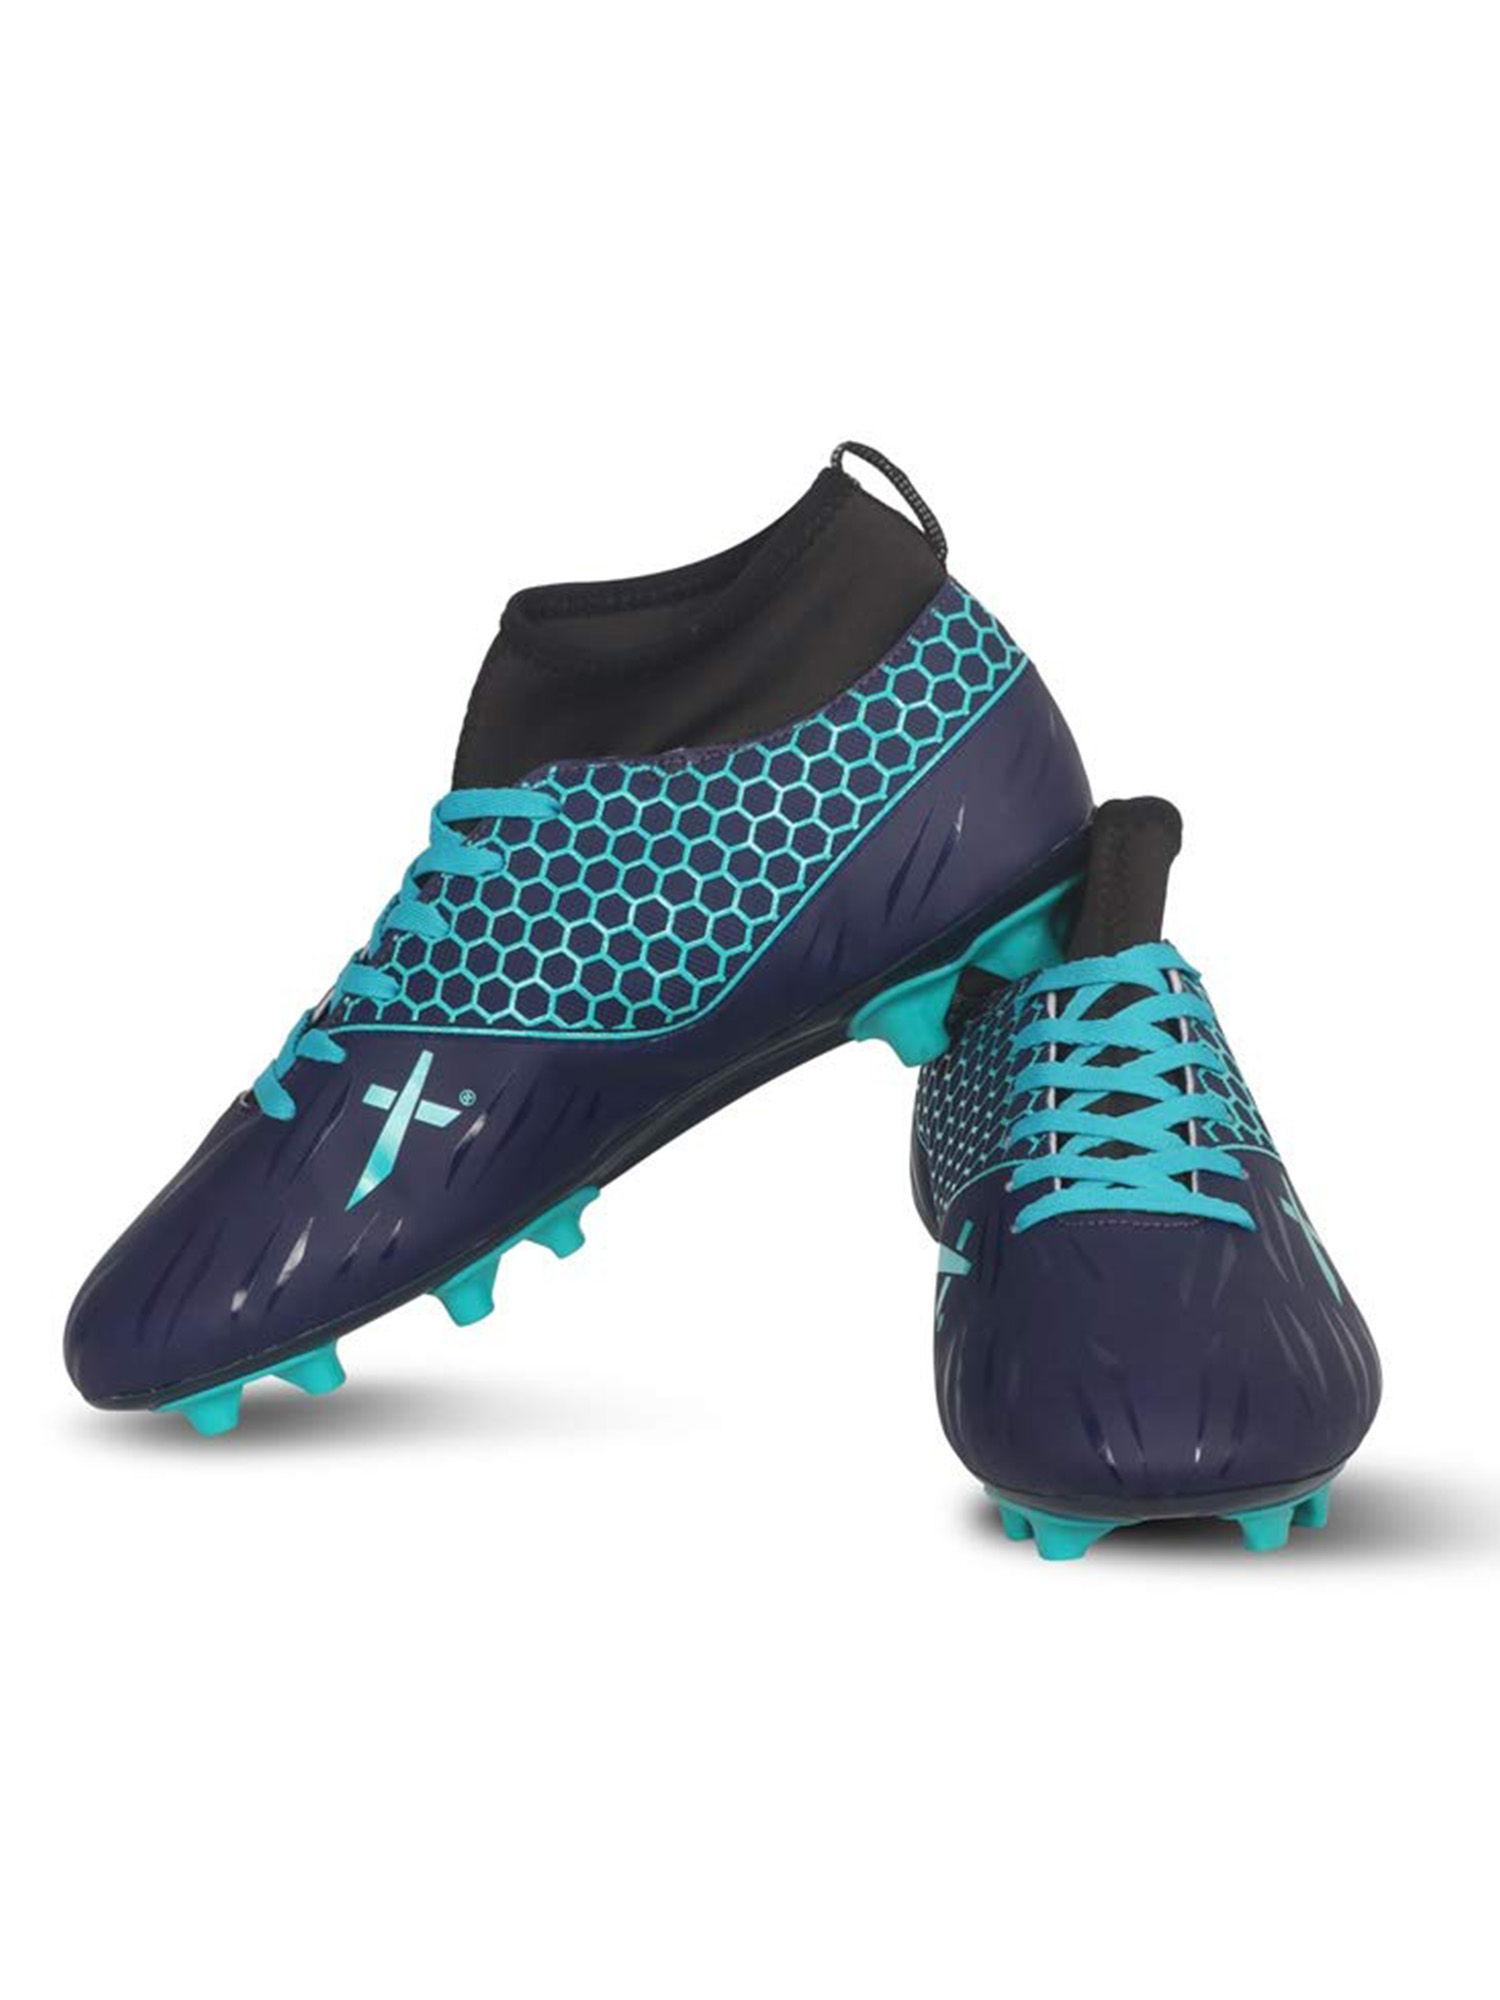 Champion Football Shoes for Men